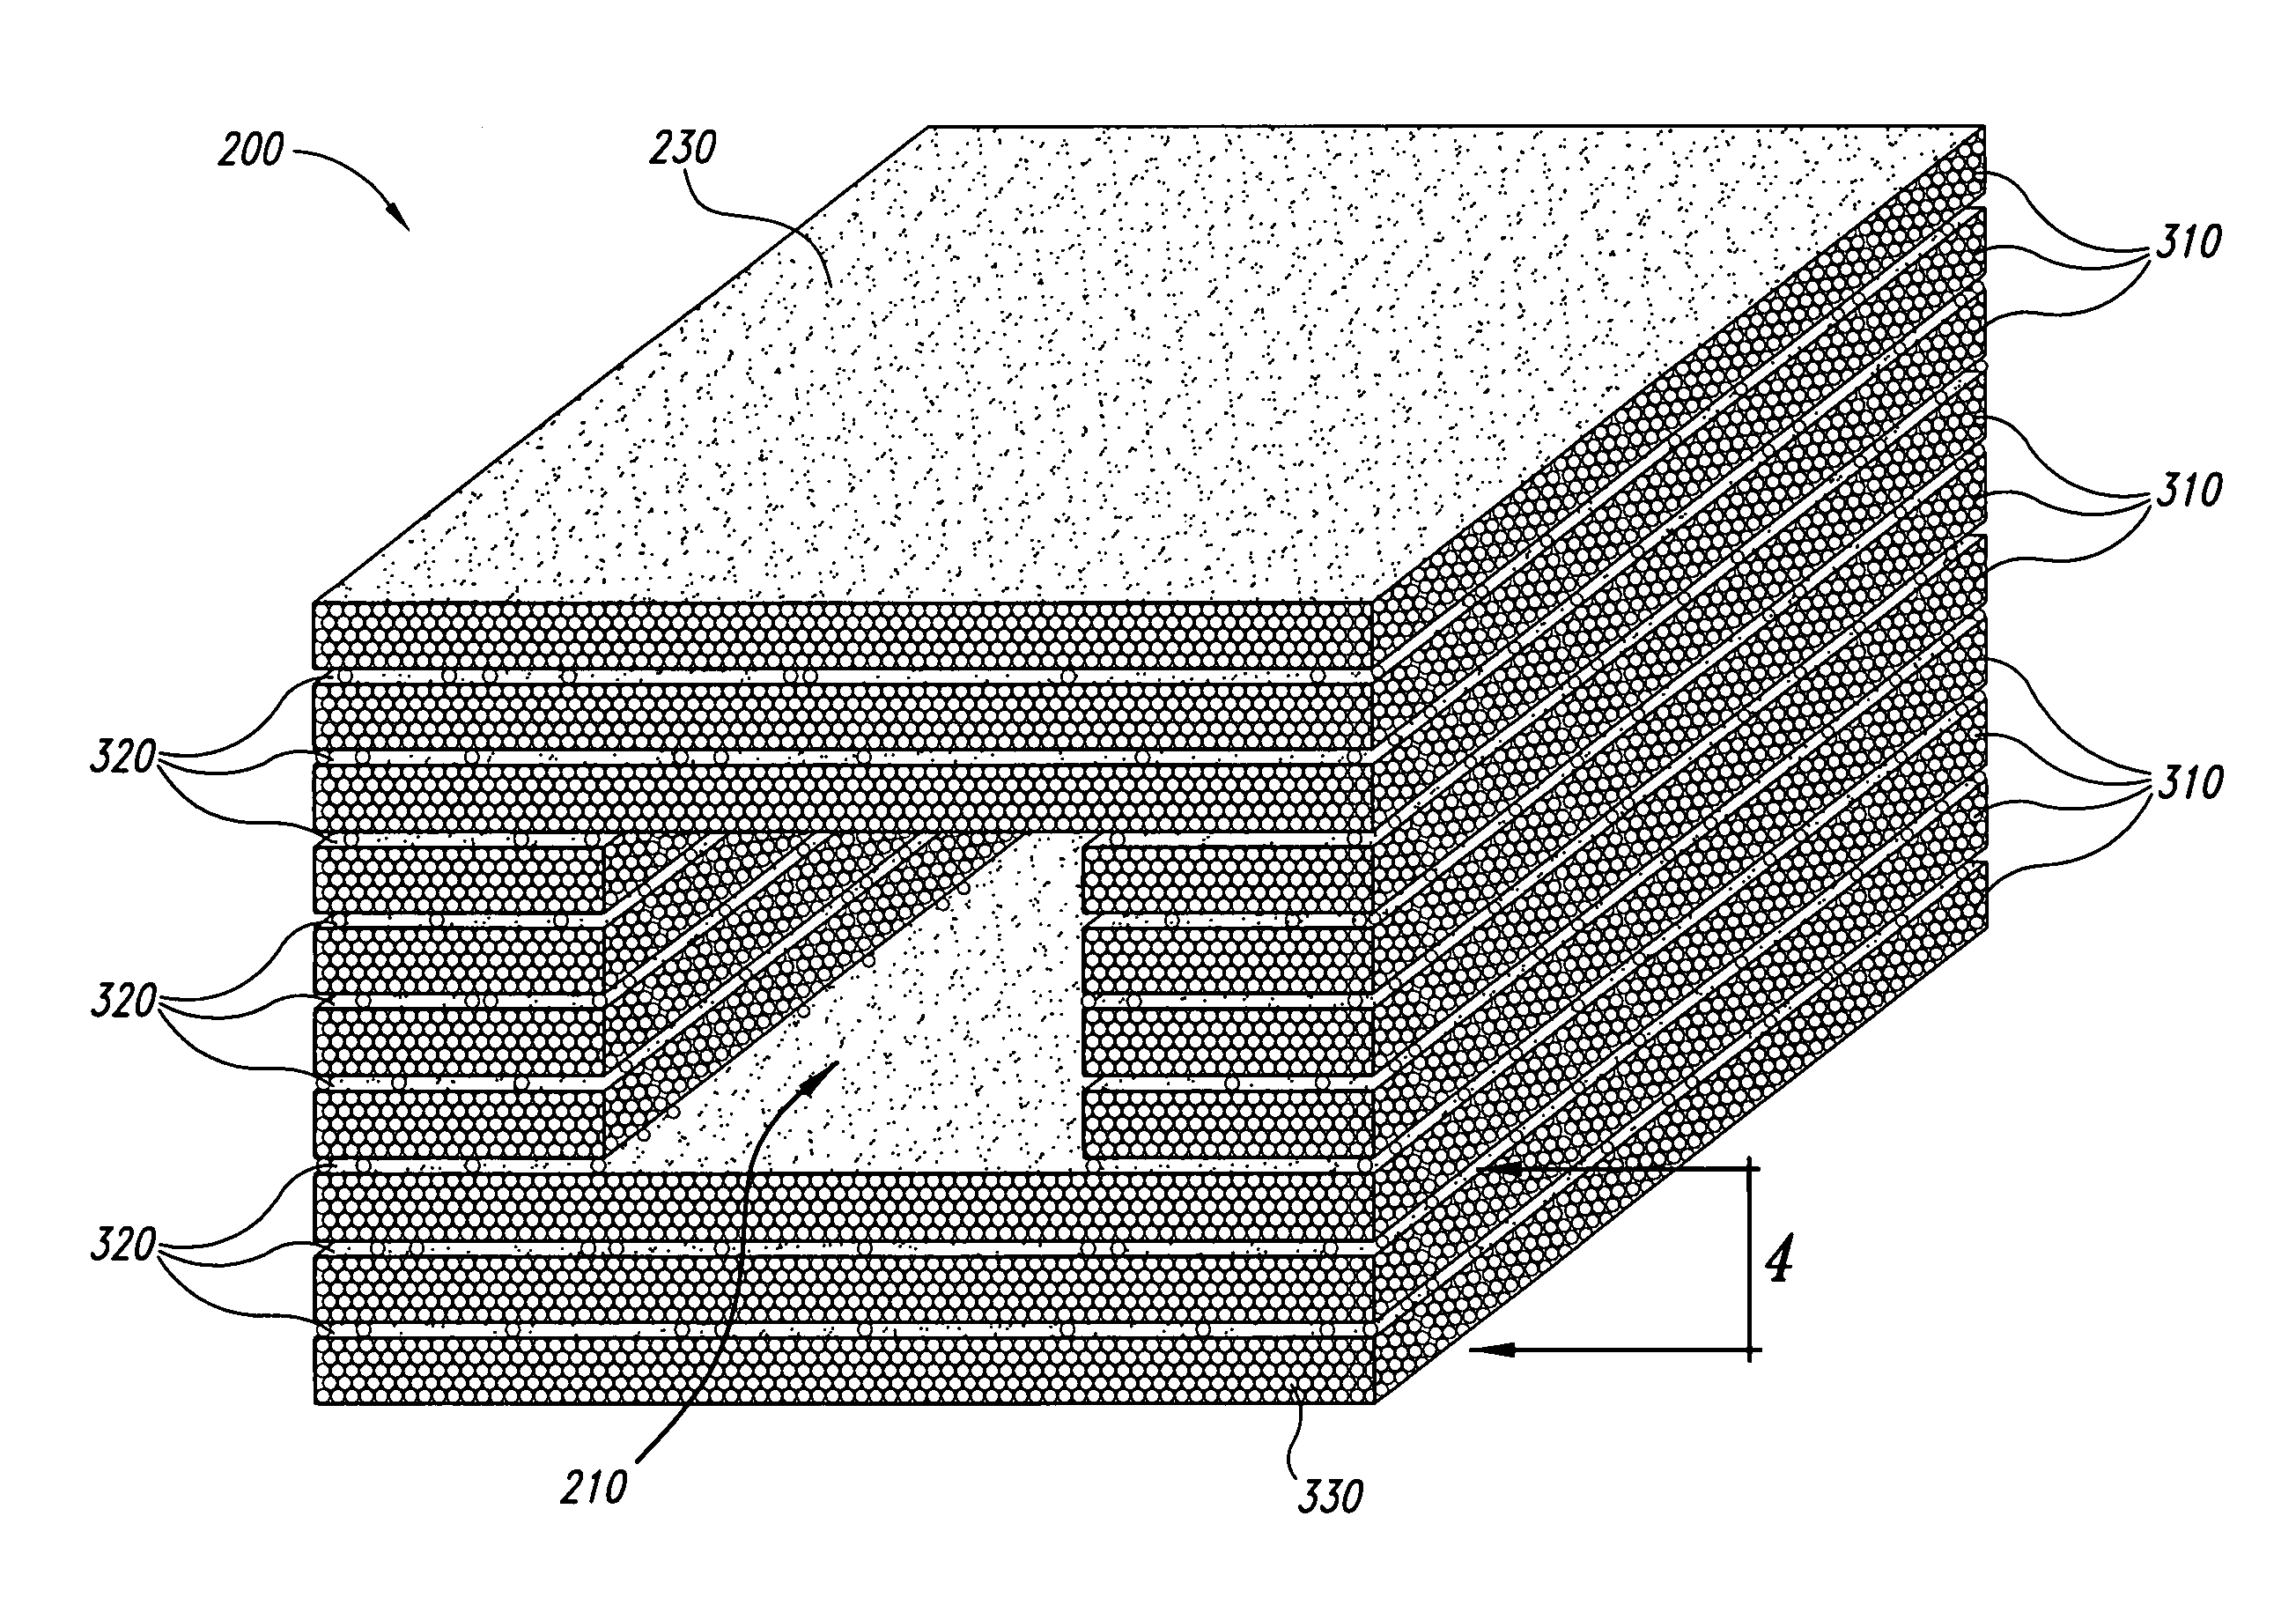 Method and apparatus for engineered regenerative biostructures such as hydroxyapatite substrates for bone healing applications